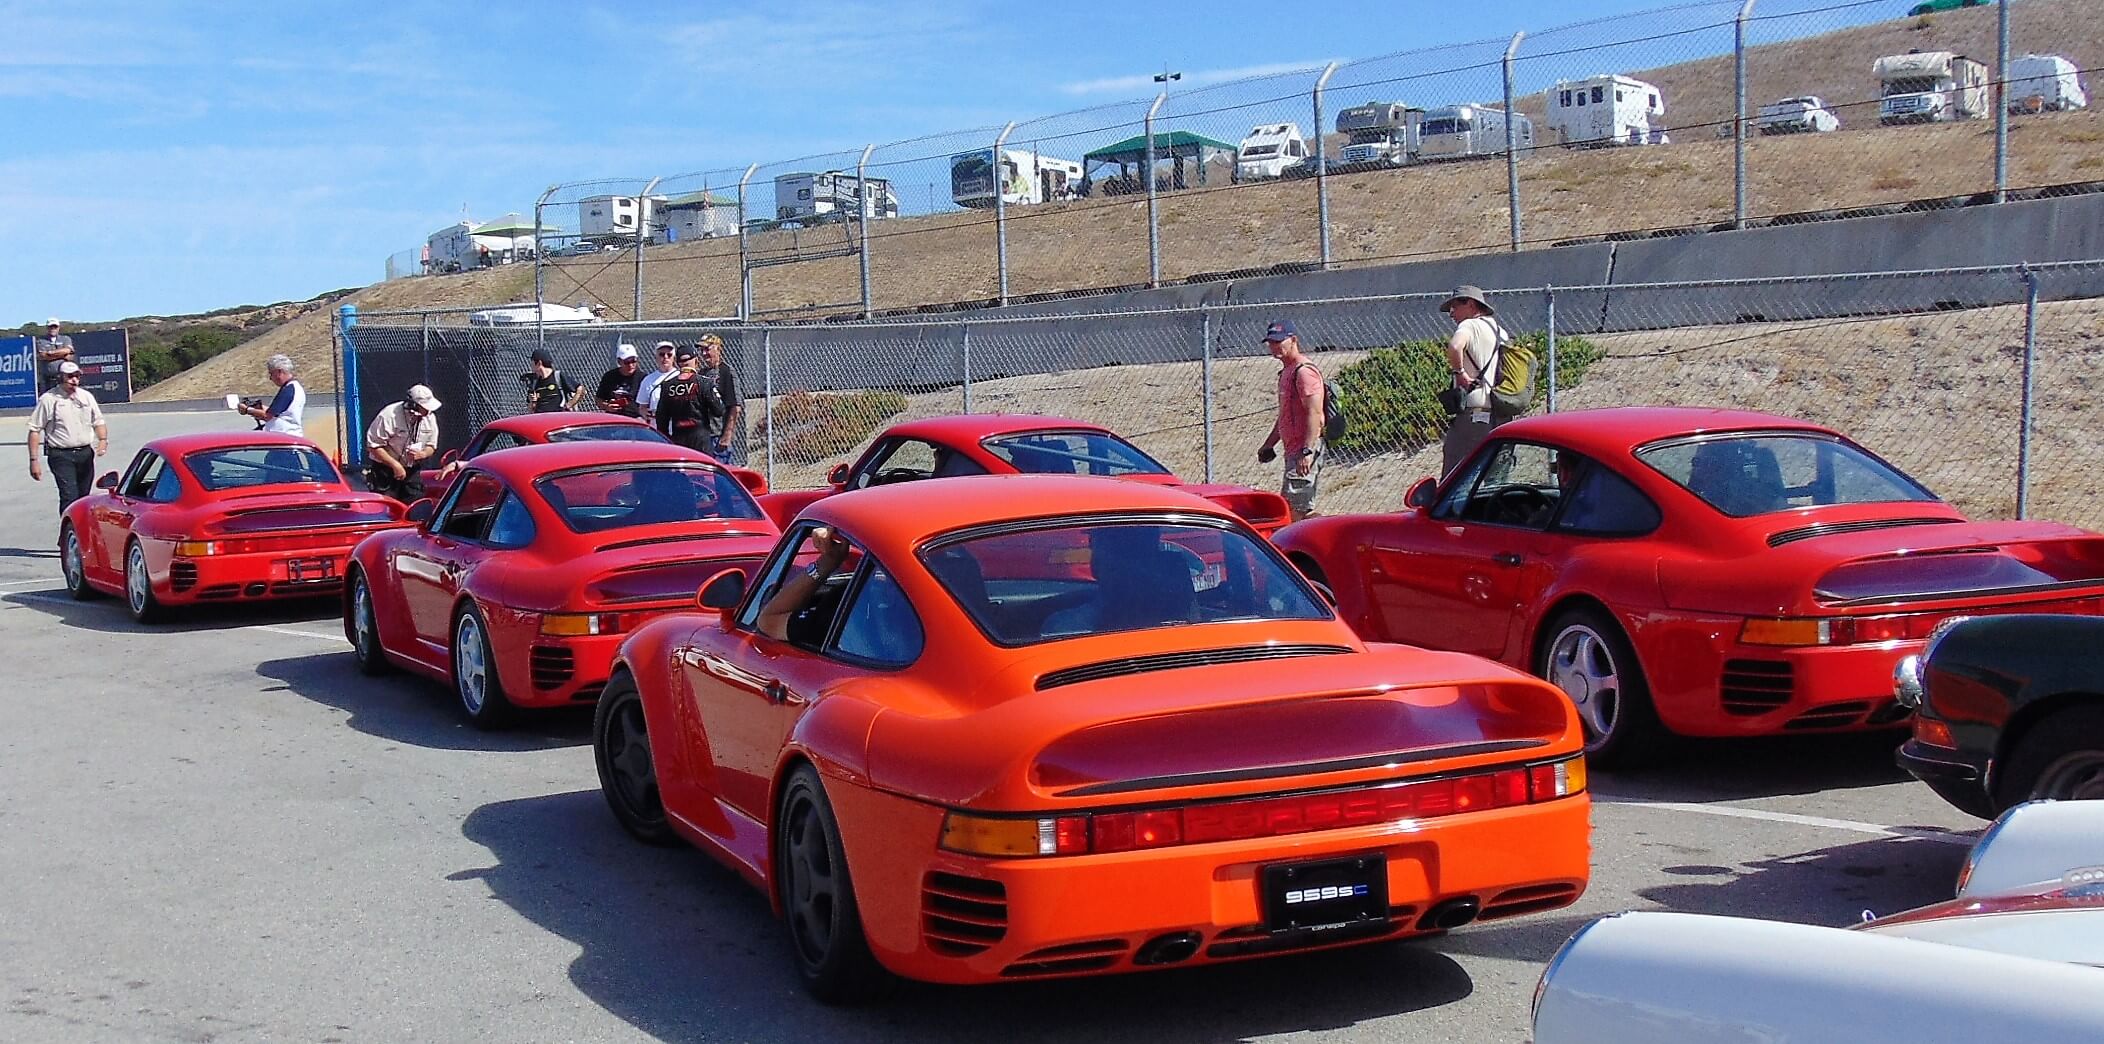 At least 9 Porsche 959's waiting to head out onto Laguna Seca's track for their parade laps